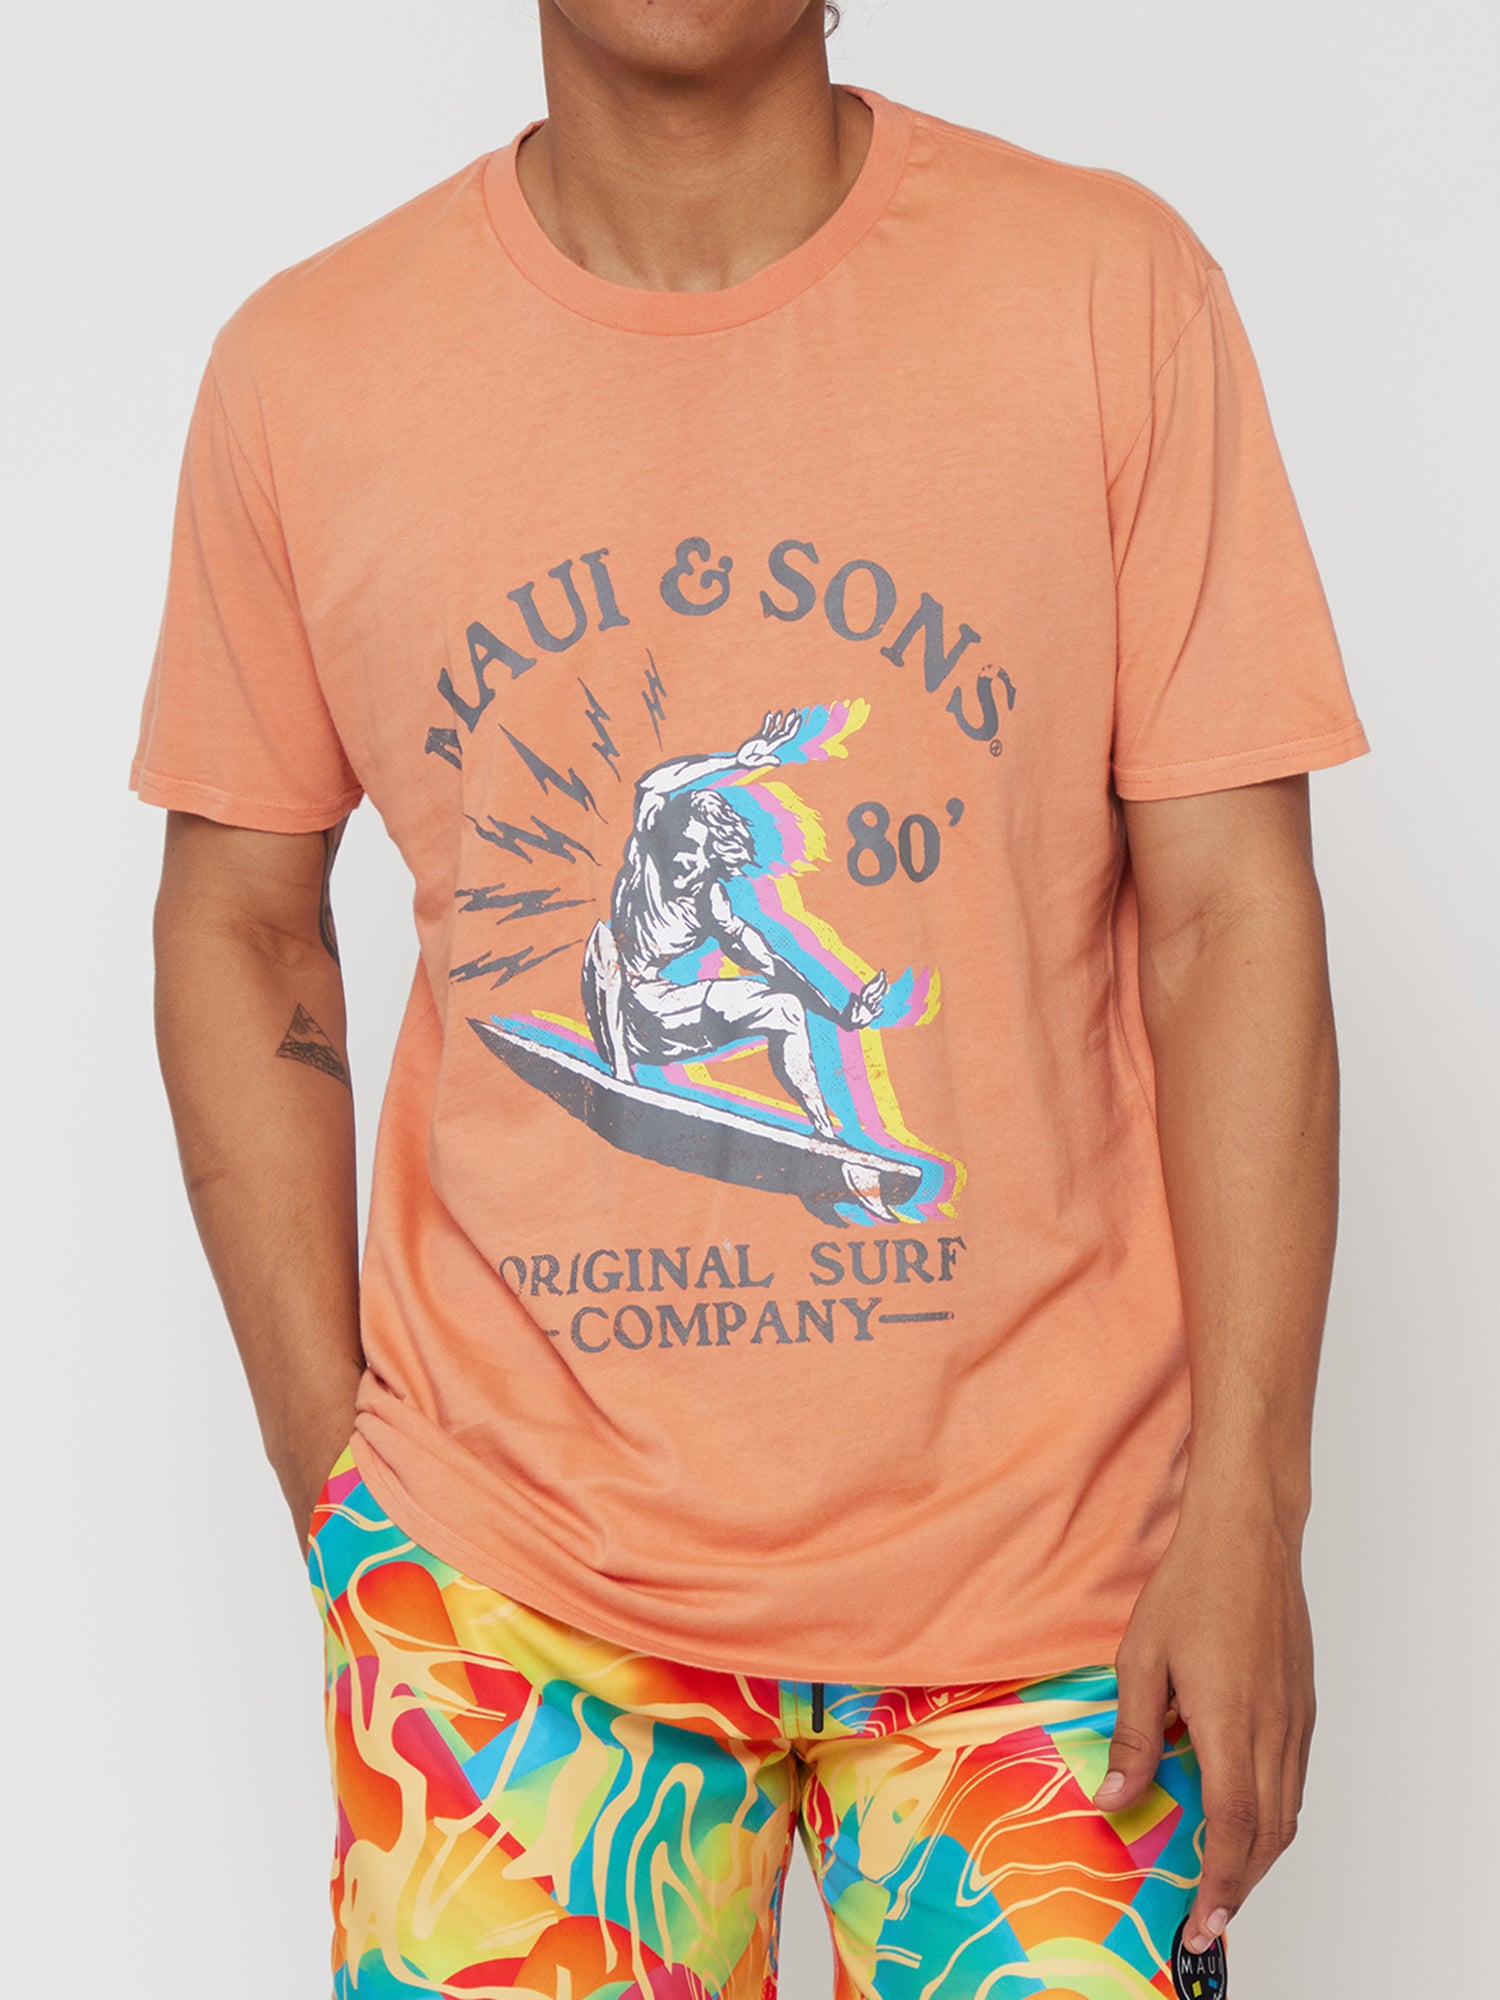 | Maui and Sons